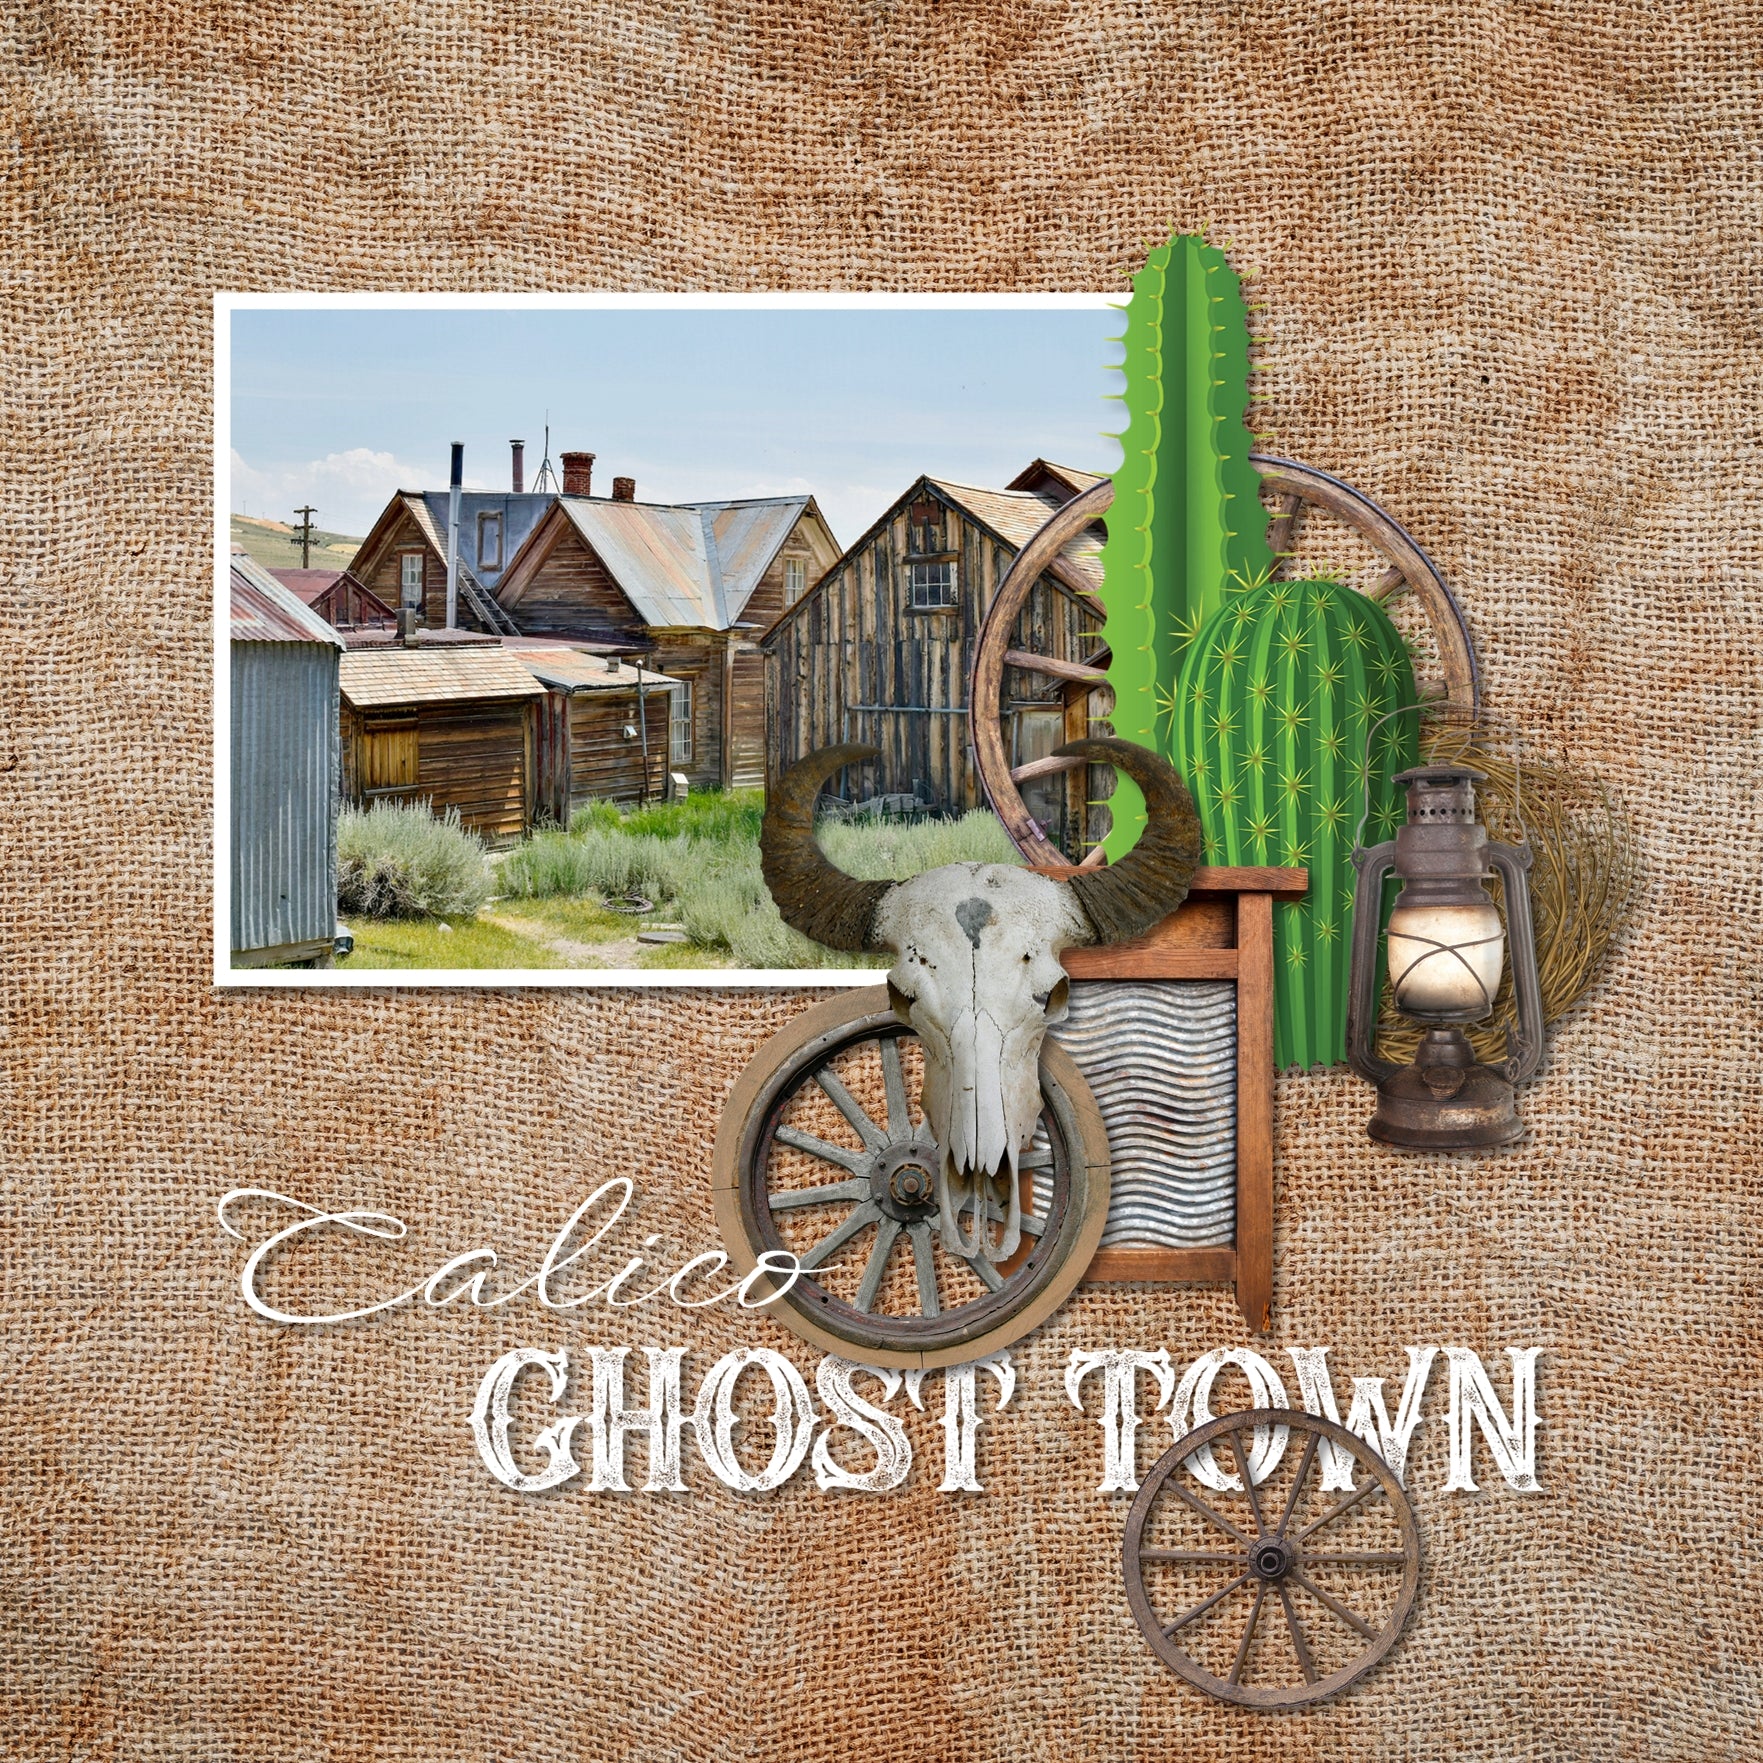 The Wild West Town Papers 1 Digital Scrapbook Kit features authentic western, wood, and desert earth digital art papers accented by a burlap texture. Perfect for western-inspired backgrounds to your digital scrapbook pages including travels to the Southwest (Arizona, Colorado, Utah, Nevada, New Mexico), cowboy and cowgirl dances and hoedowns, rodeo and ranch events, ghost towns, vacations to the desert, Mexico, and so much more!